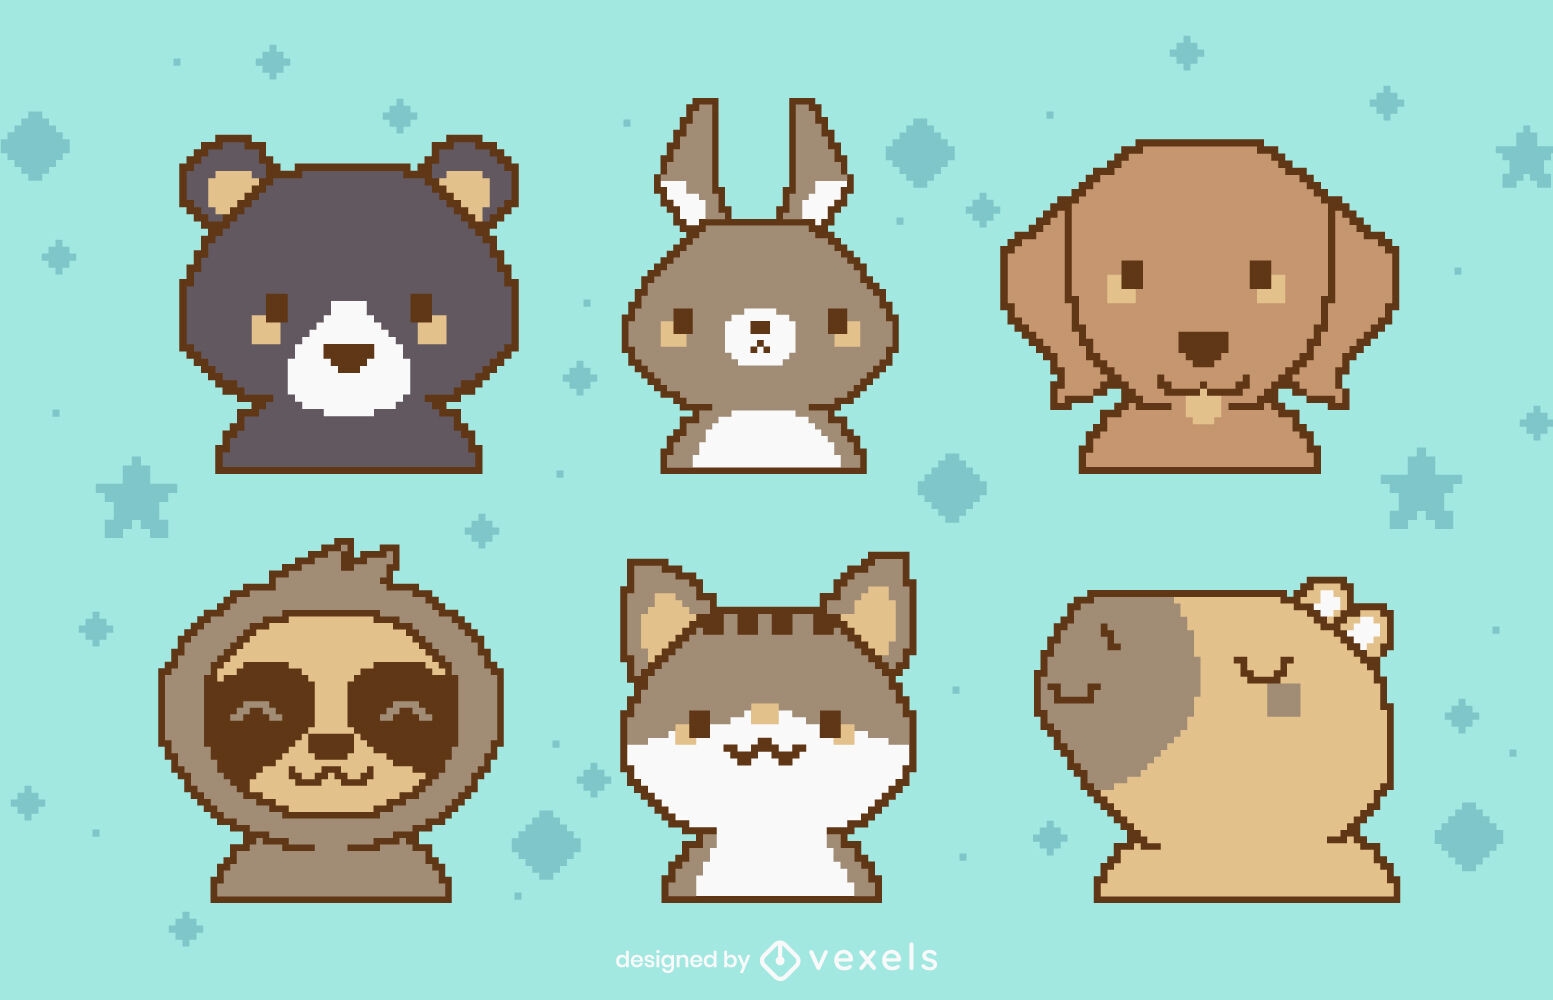 Adorable pixel art wild animals and pets